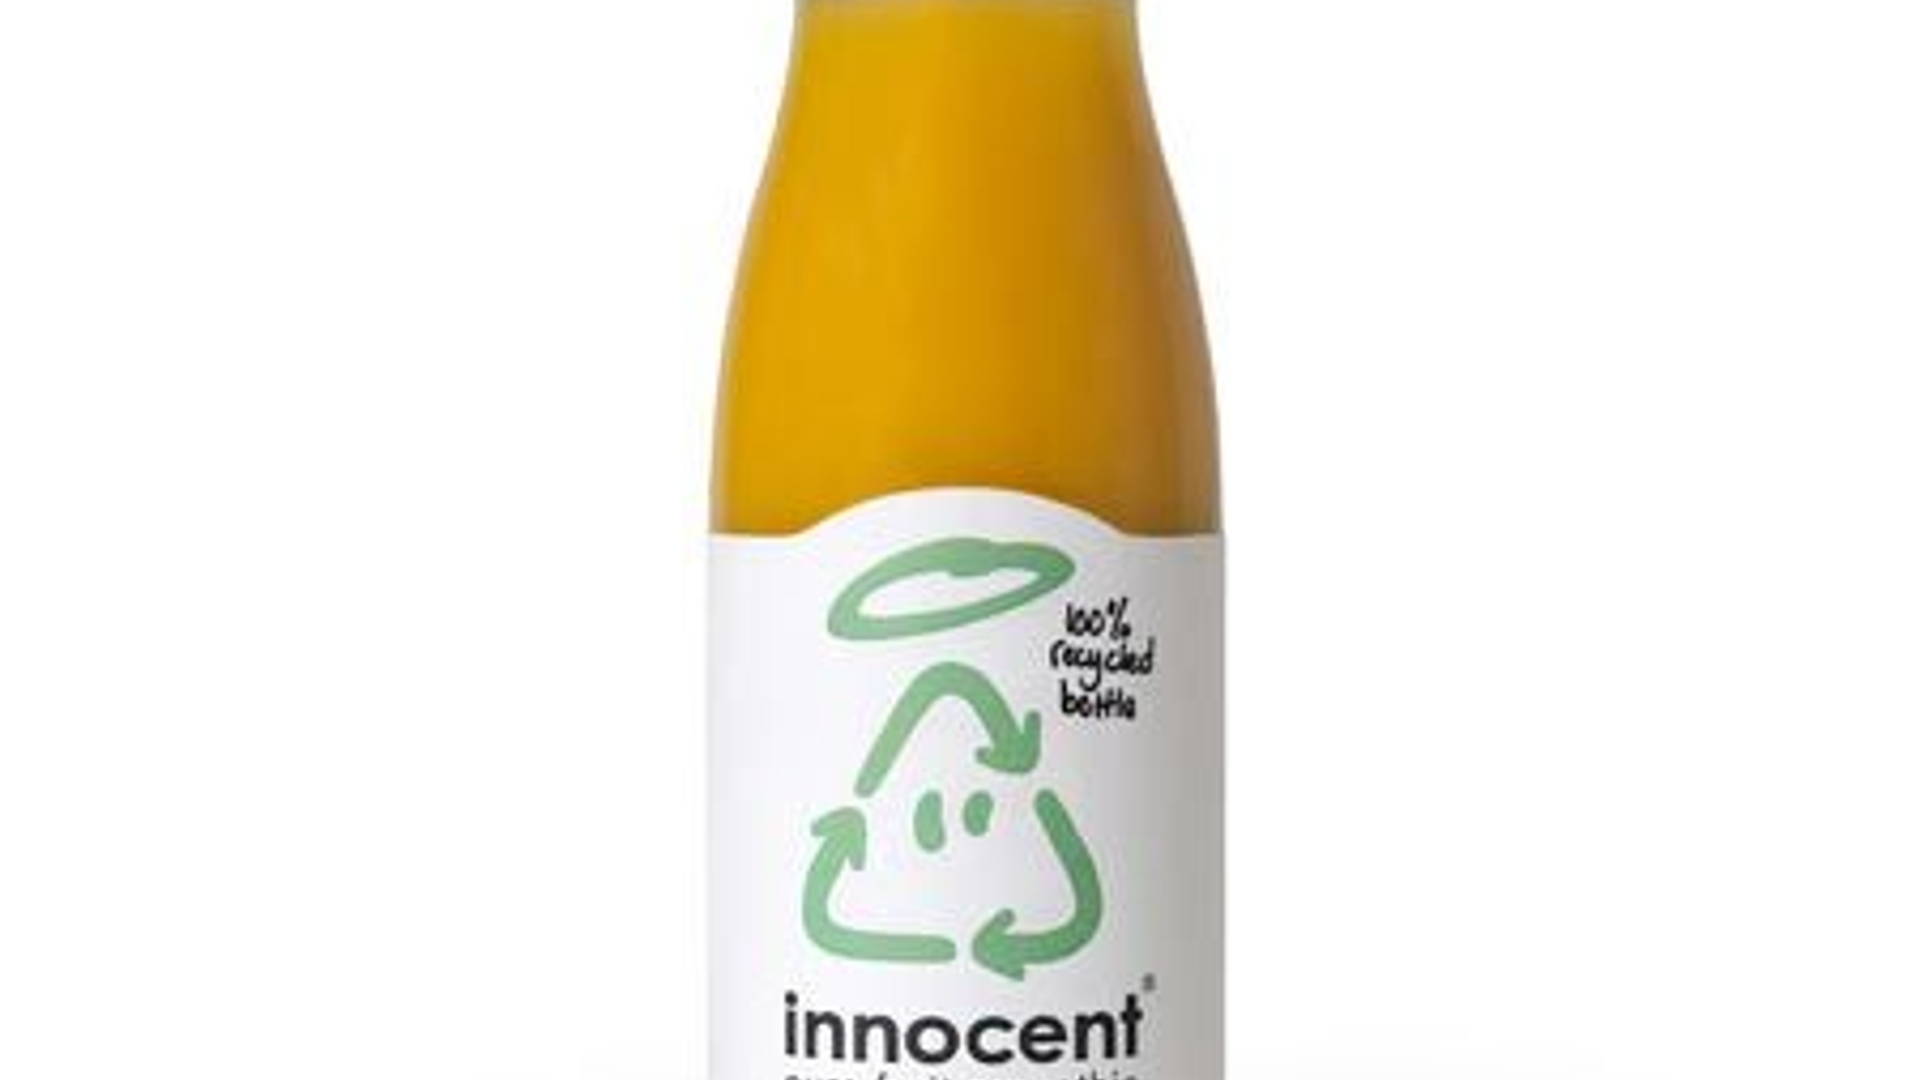 Featured image for Innocent rPET Packaging Expands Limited Edition Label Design Unveiled